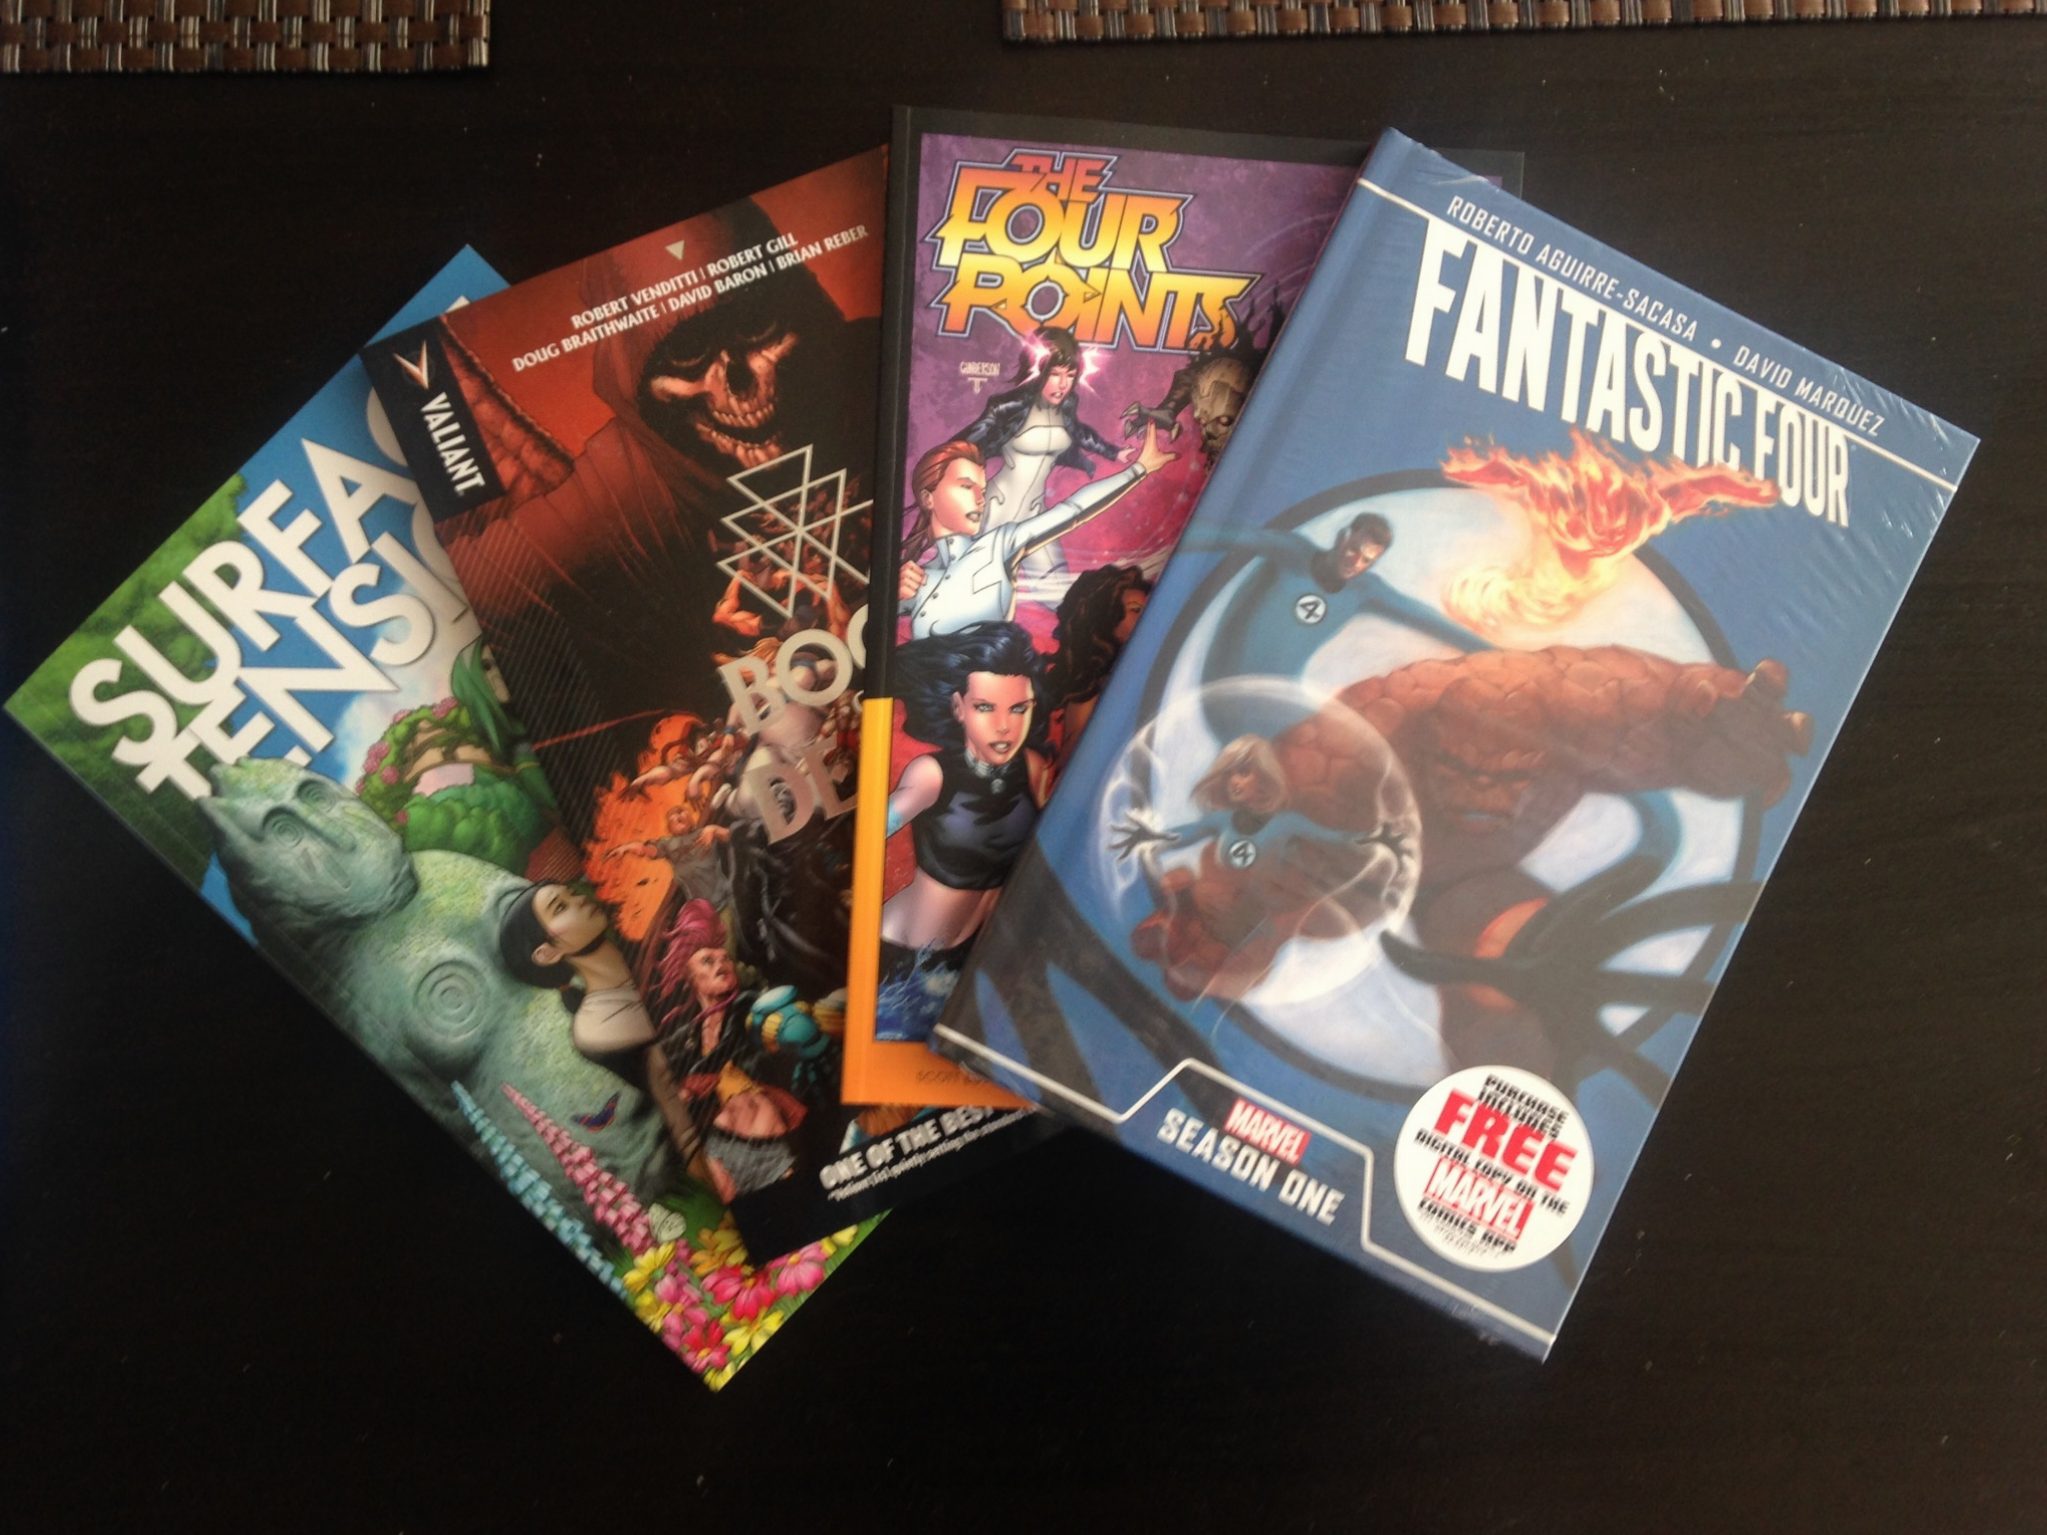 Comic bento, surface tension, the four points, fantastic four s1, book of death